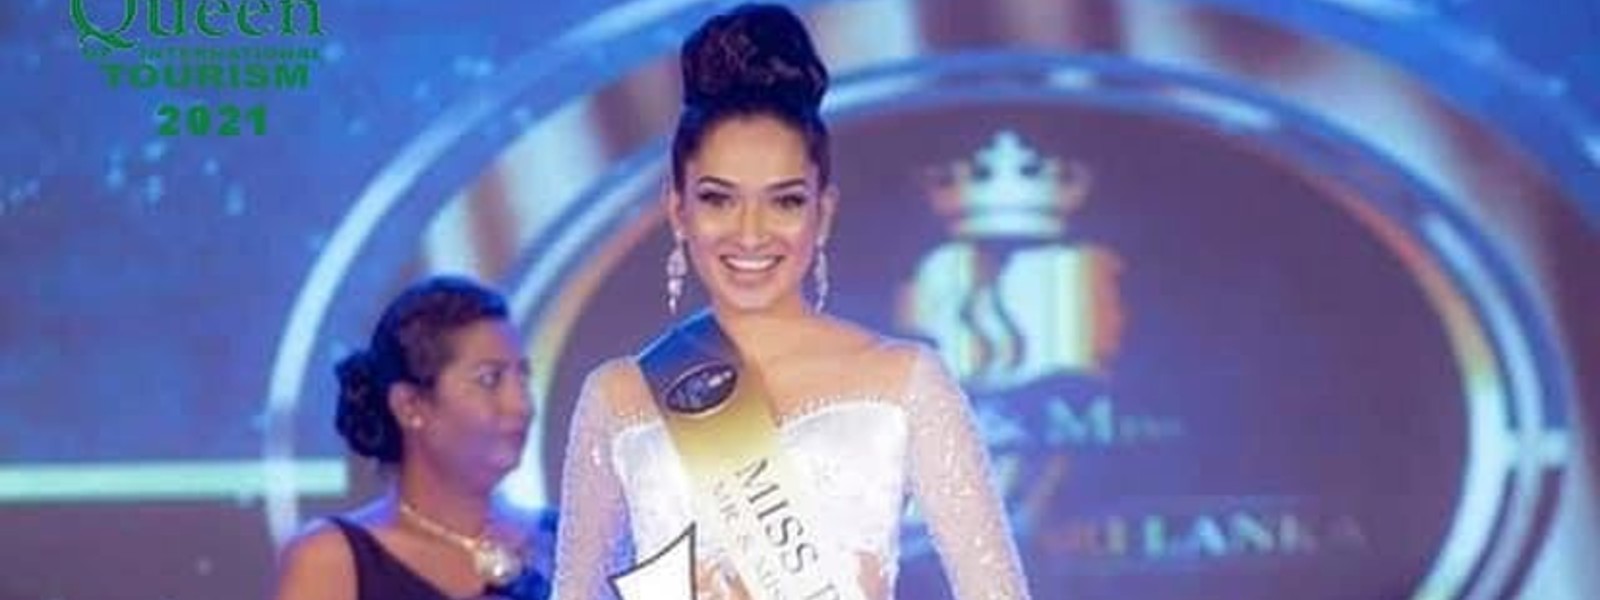 Nalesha Bhanu crowned Queen of World Tourism 2021